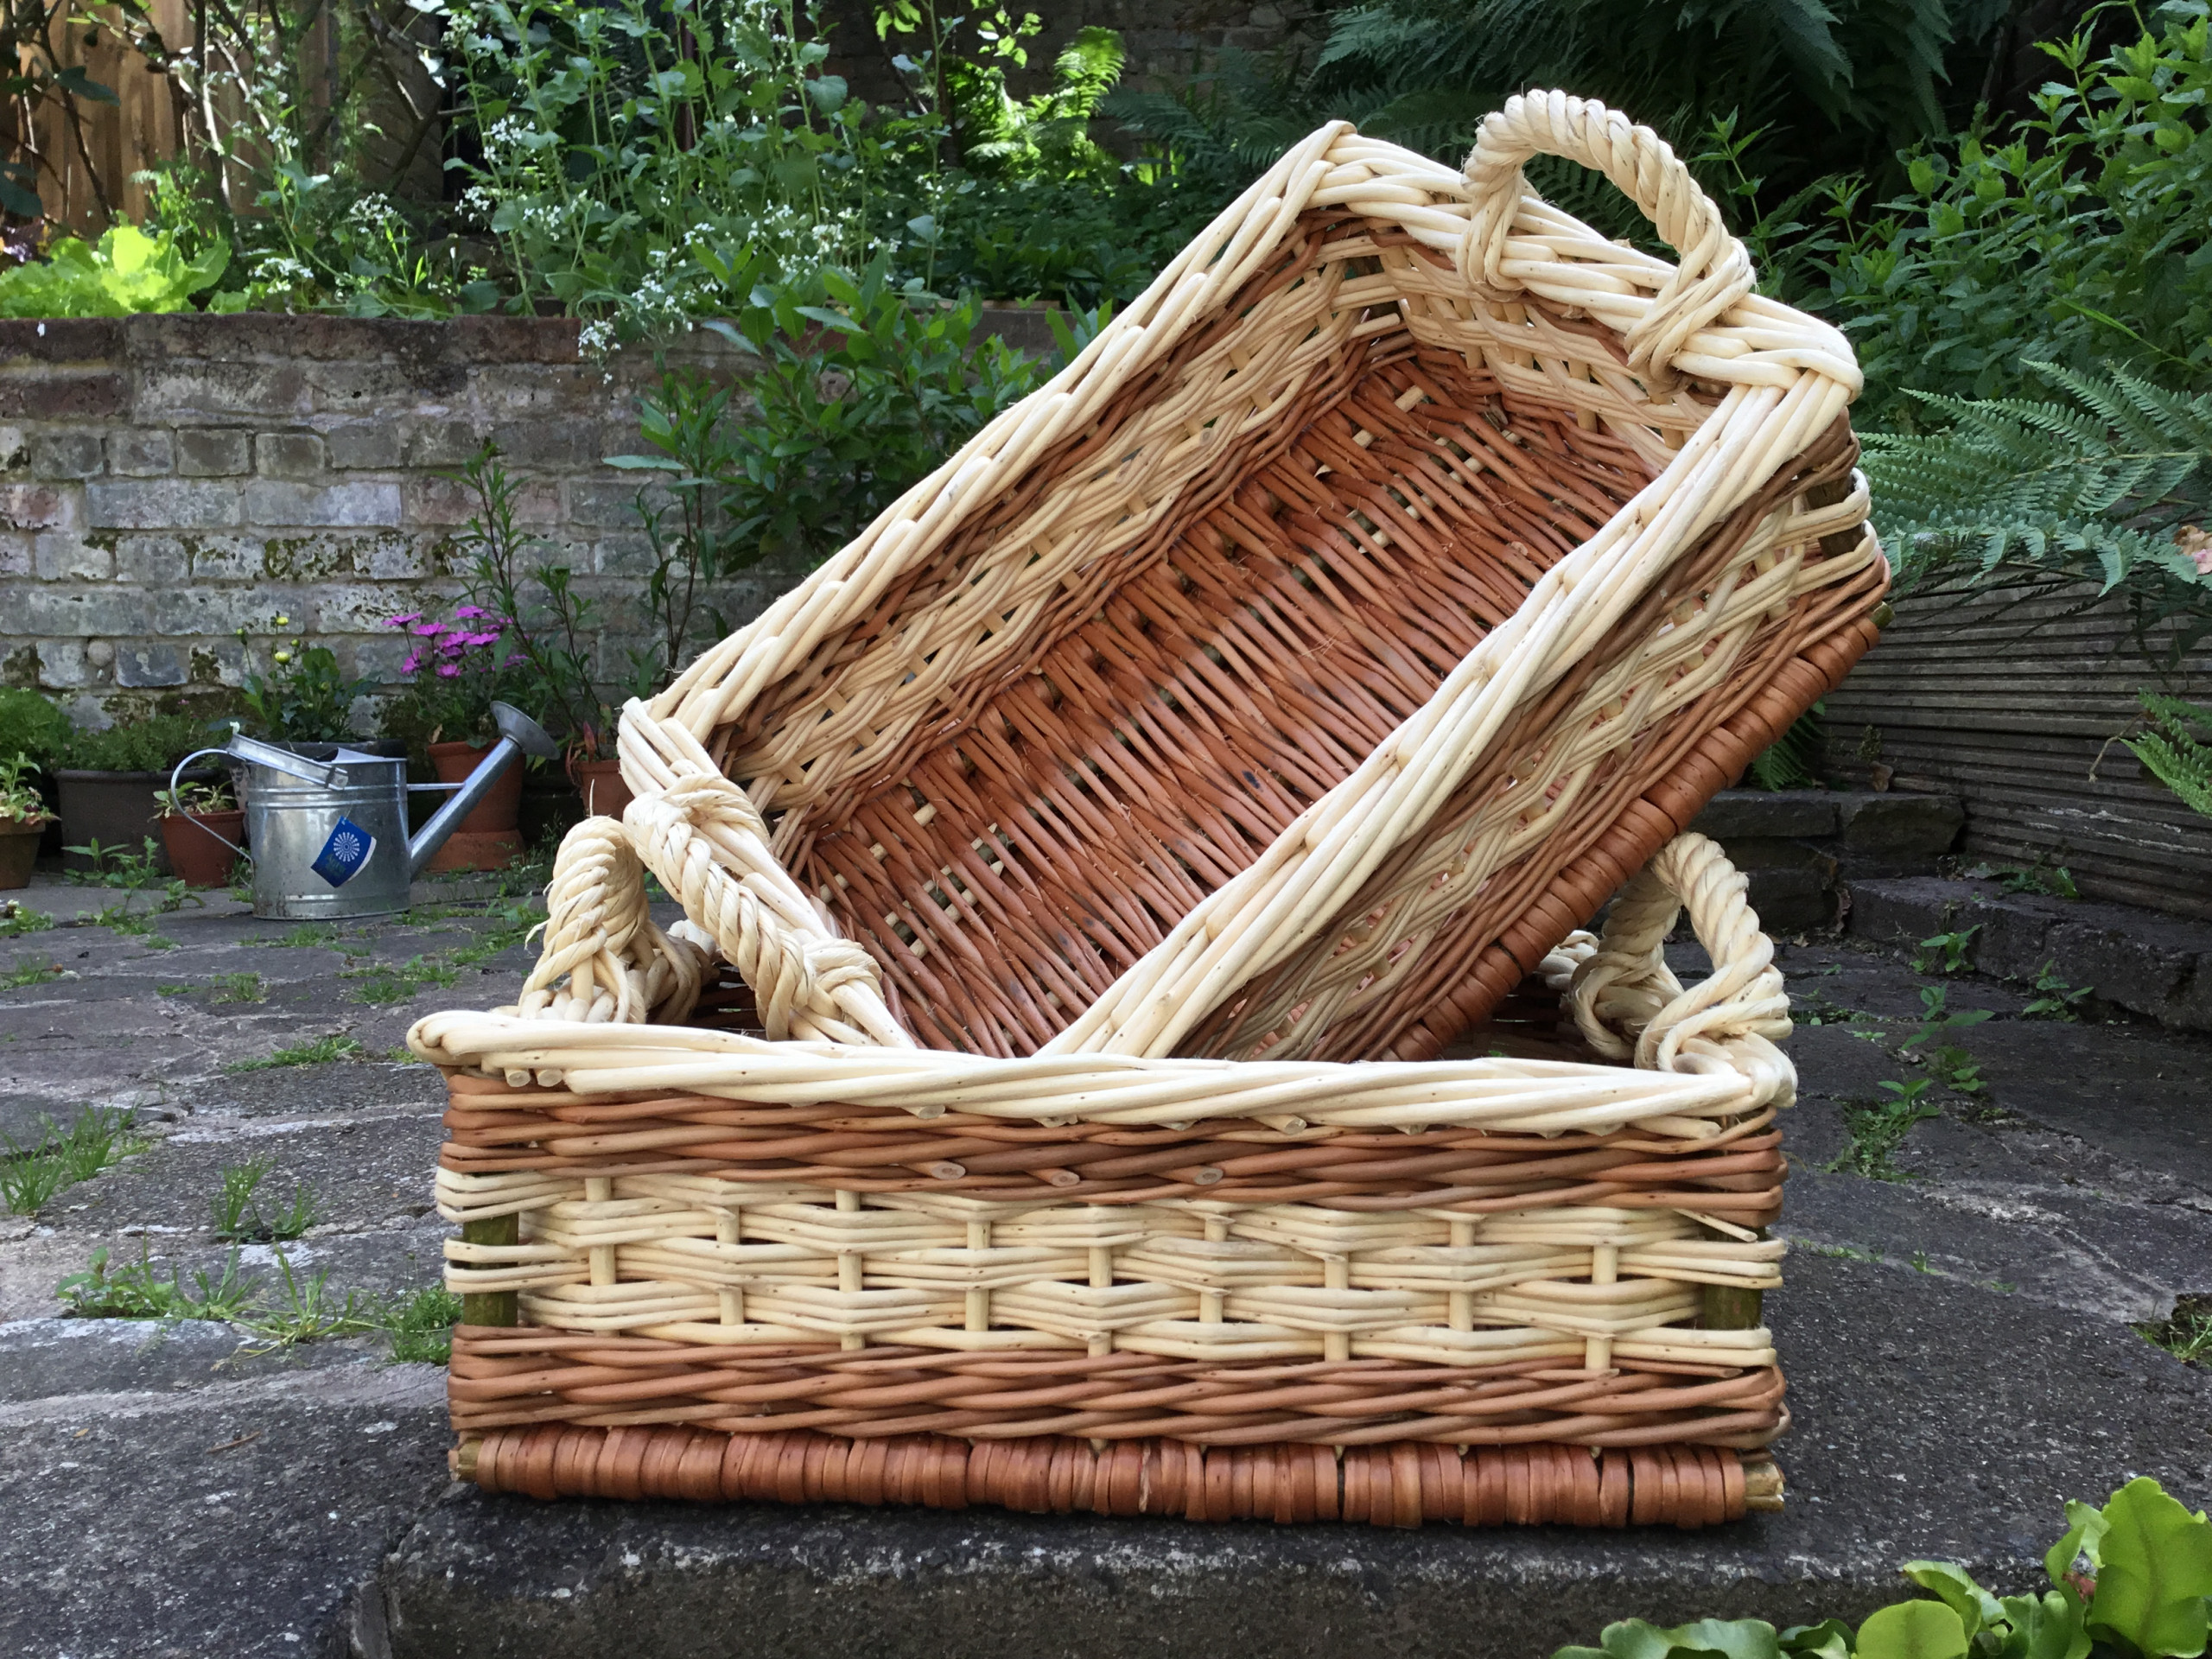 Square Basketry Workshop – for experienced weavers